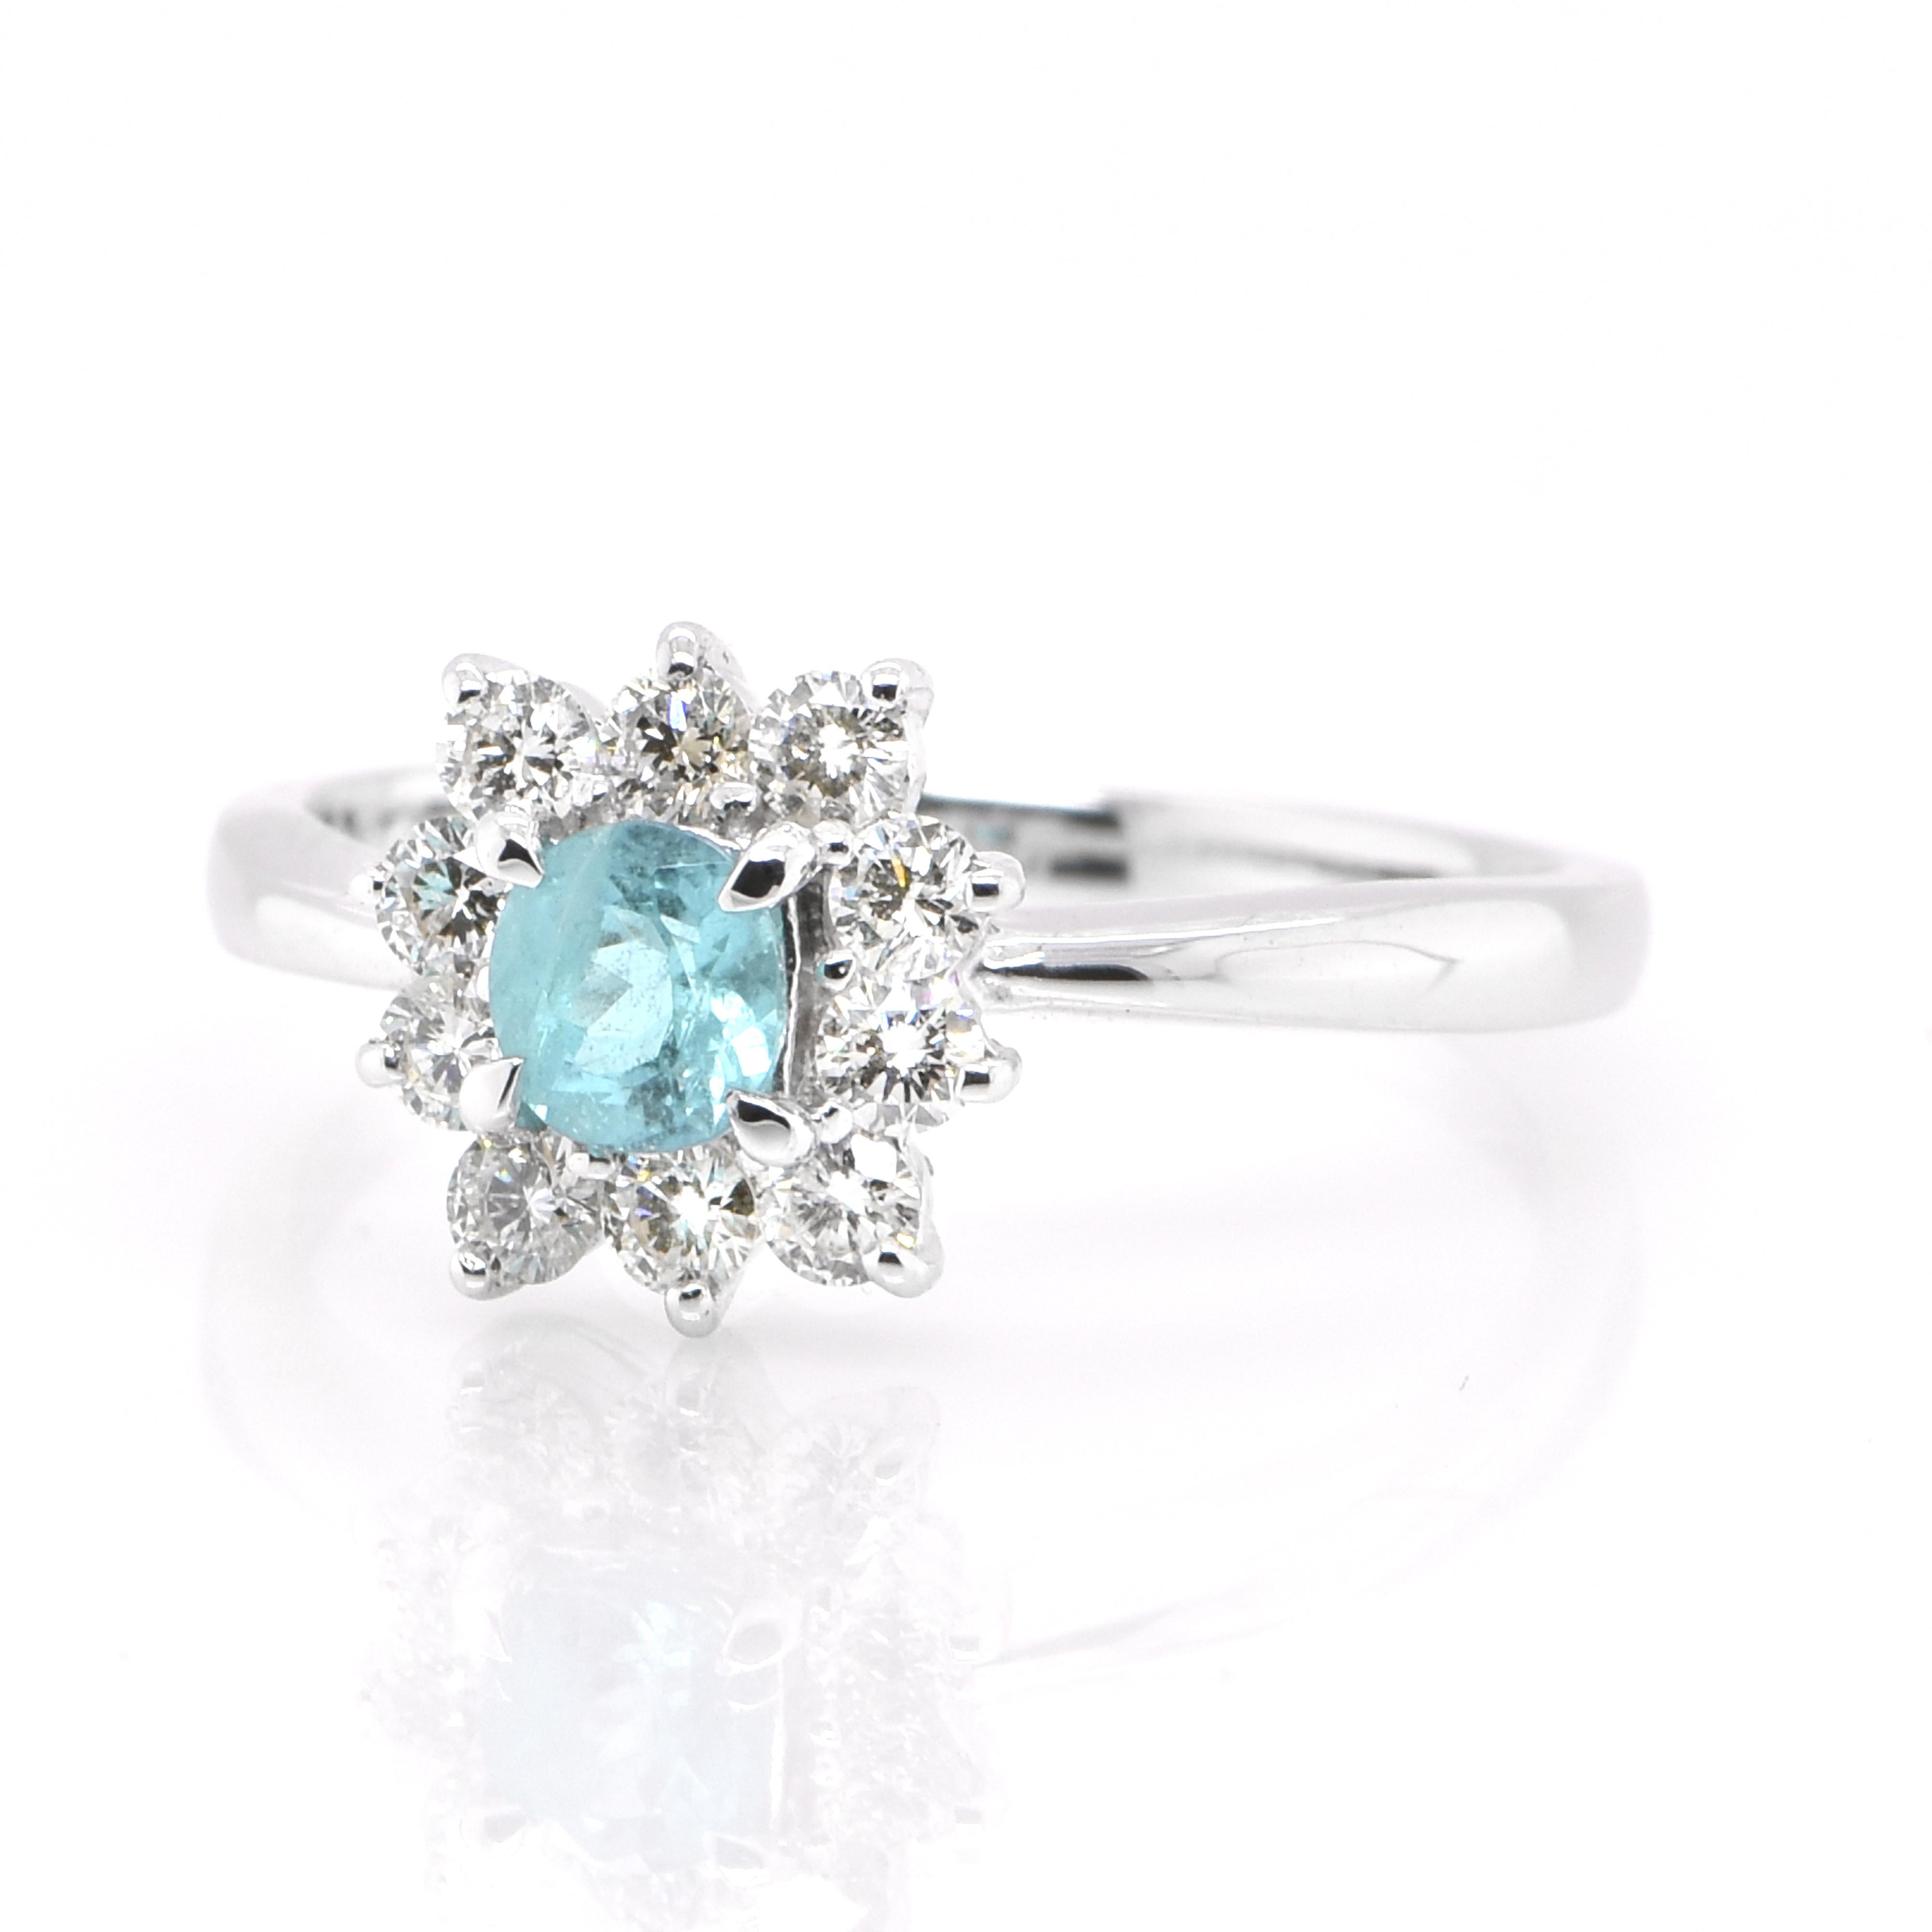 A beautiful ring featuring a GIA Certified 0.30 Carat Natural Brazilian Paraiba Tourmaline and 0.34 Carats of Diamond Accents set in Platinum. Paraiba Tourmalines were only discovered 30 years ago in the Brazilian state of the same name- Paraiba.